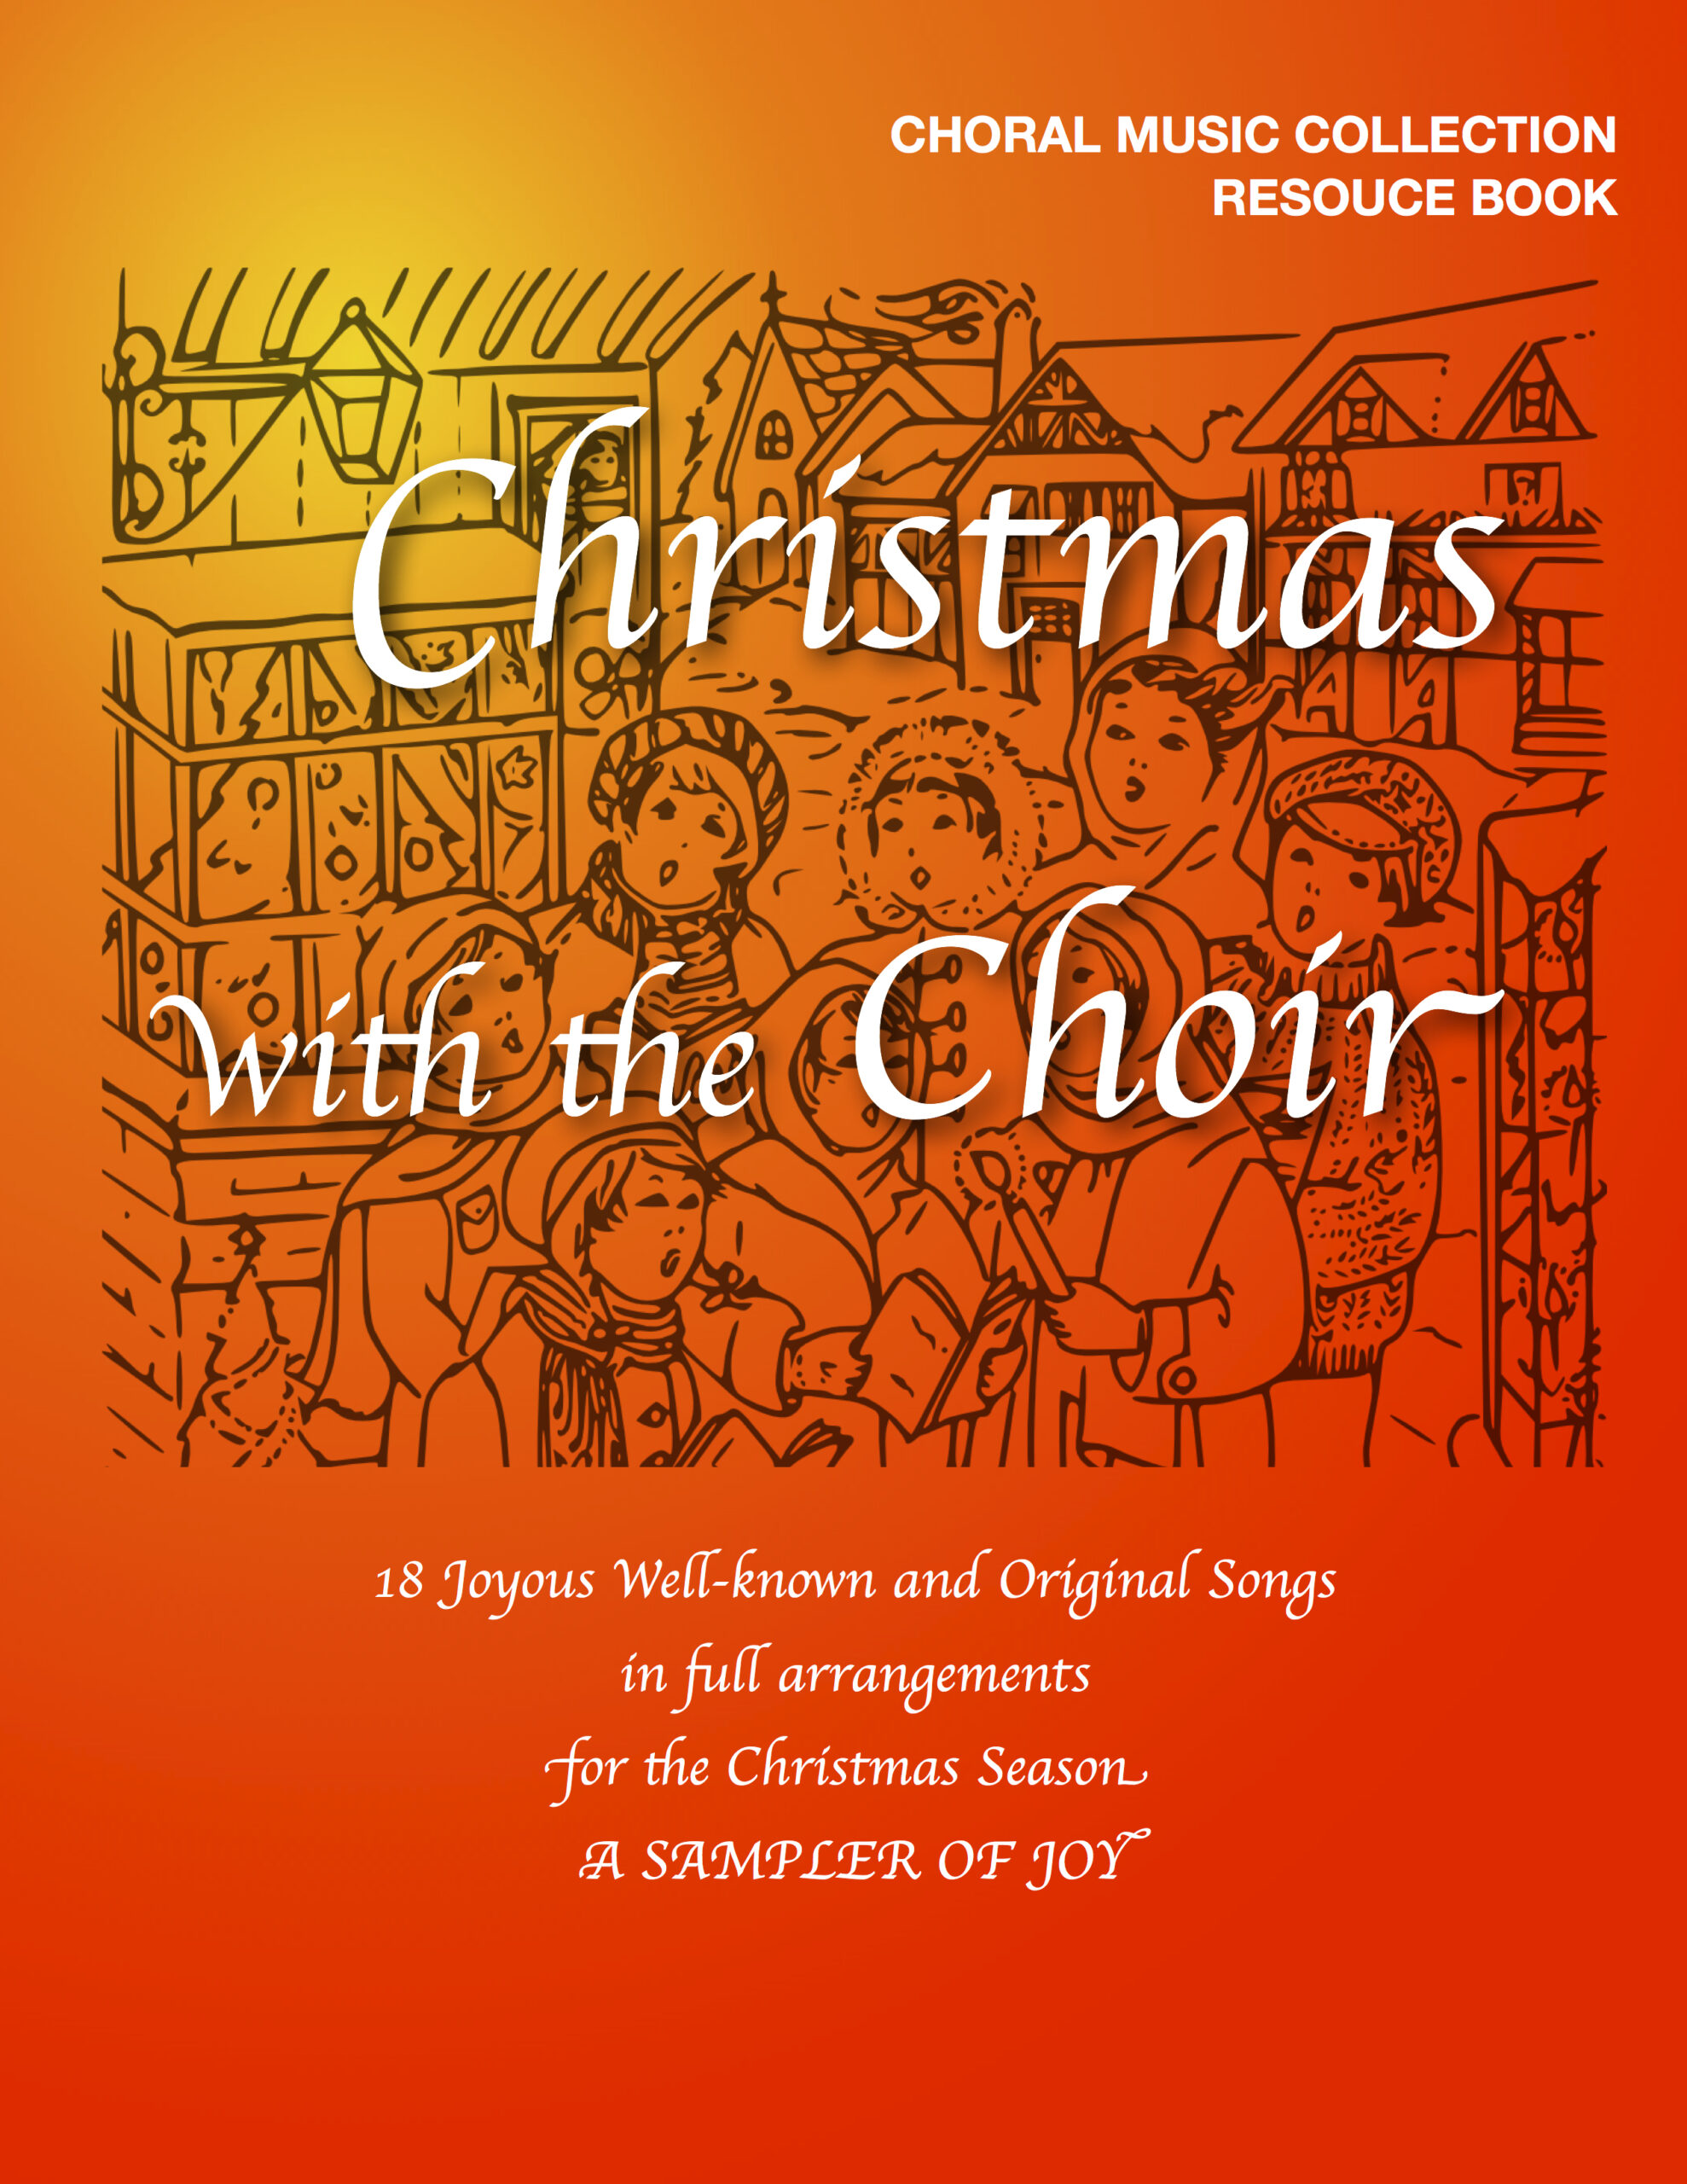 Christmas with the Choir — A Resource Sampler of Choral Songs